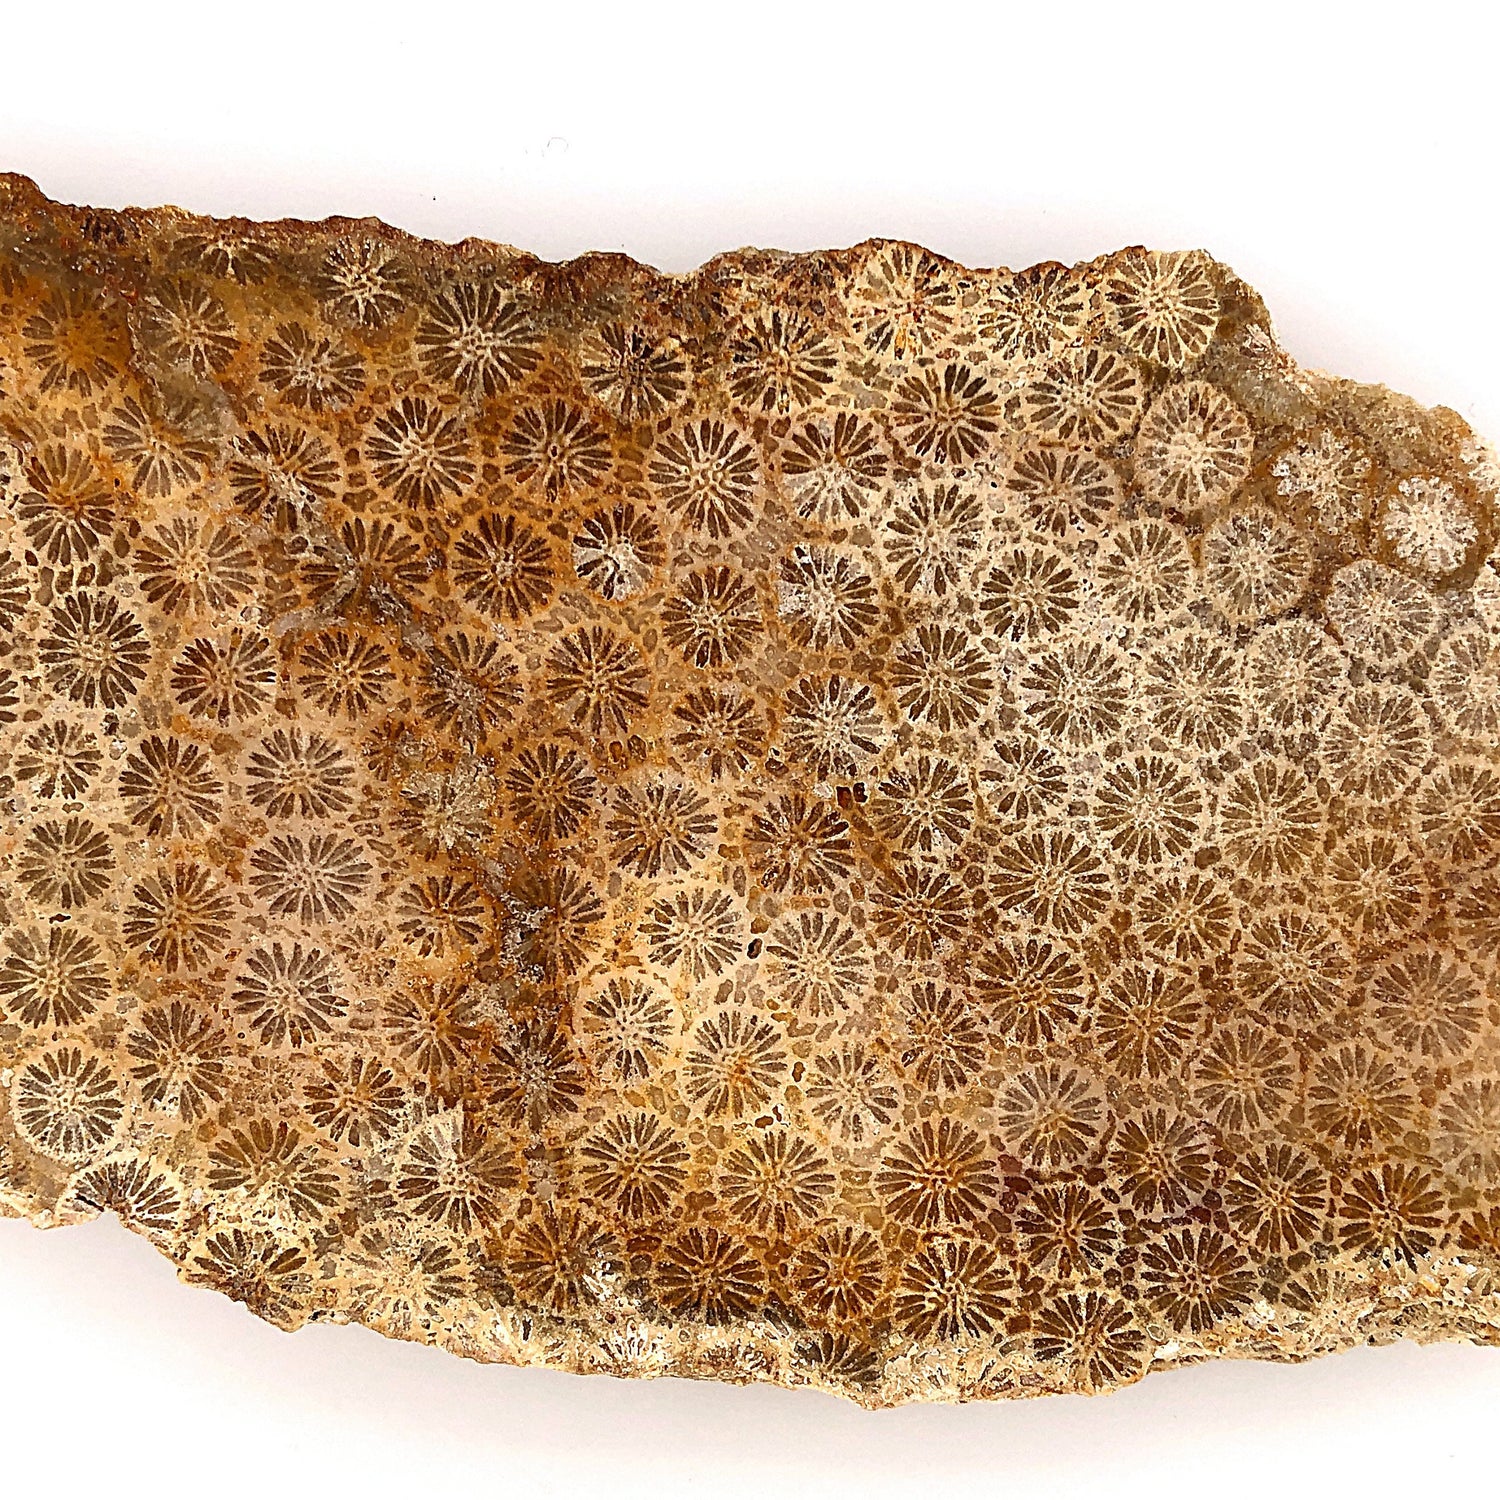 material: fossilized coral